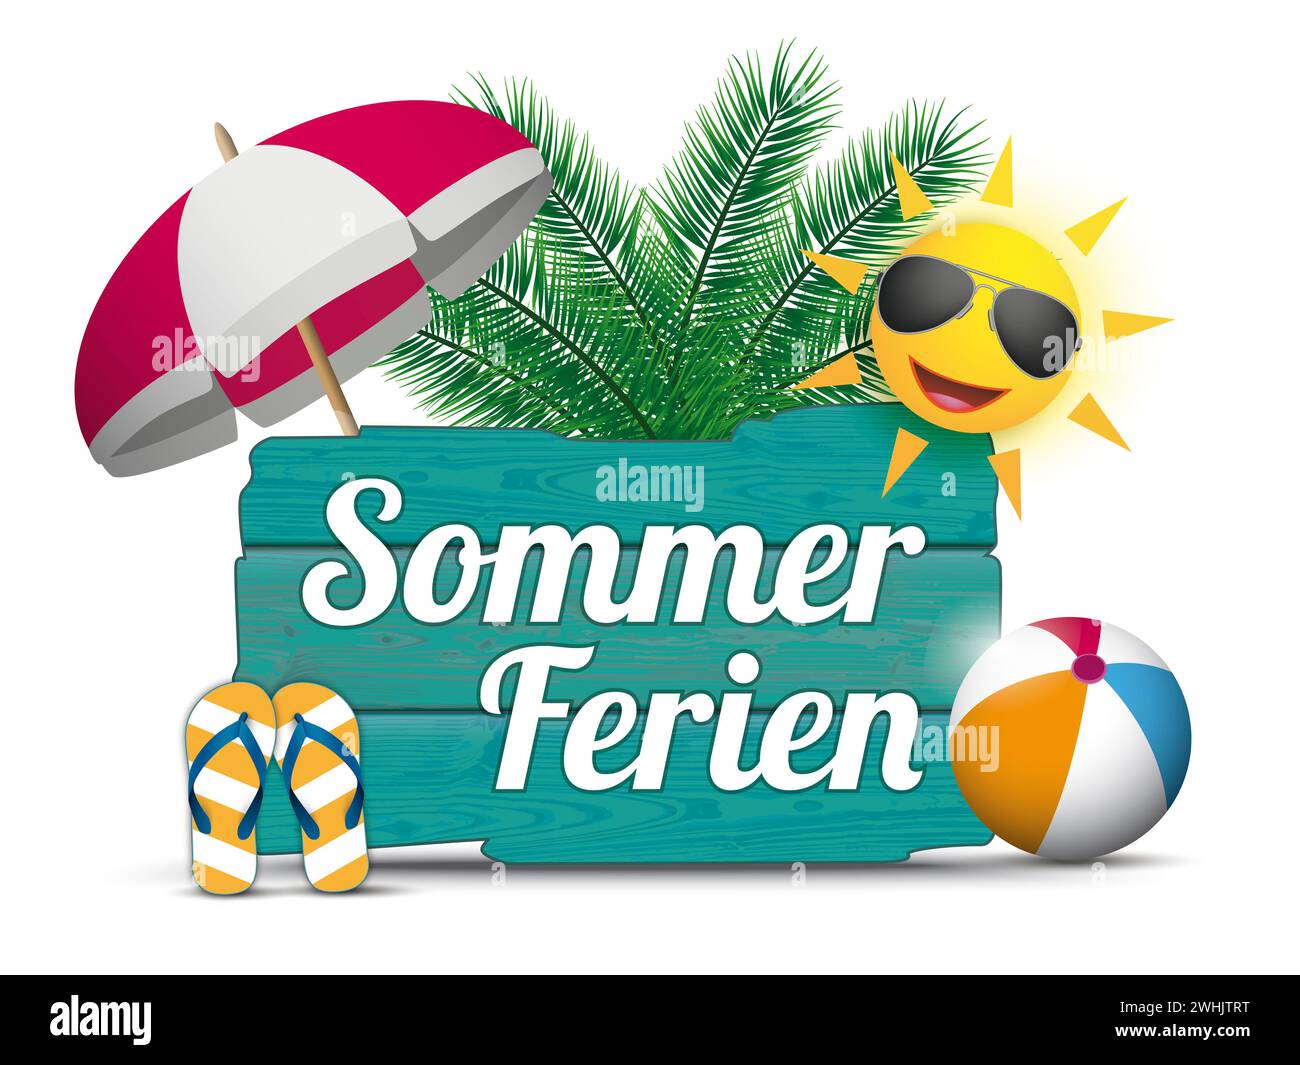 German text Sommerferien, translate Summer Holidays.  Eps 10 vector file. Stock Photo